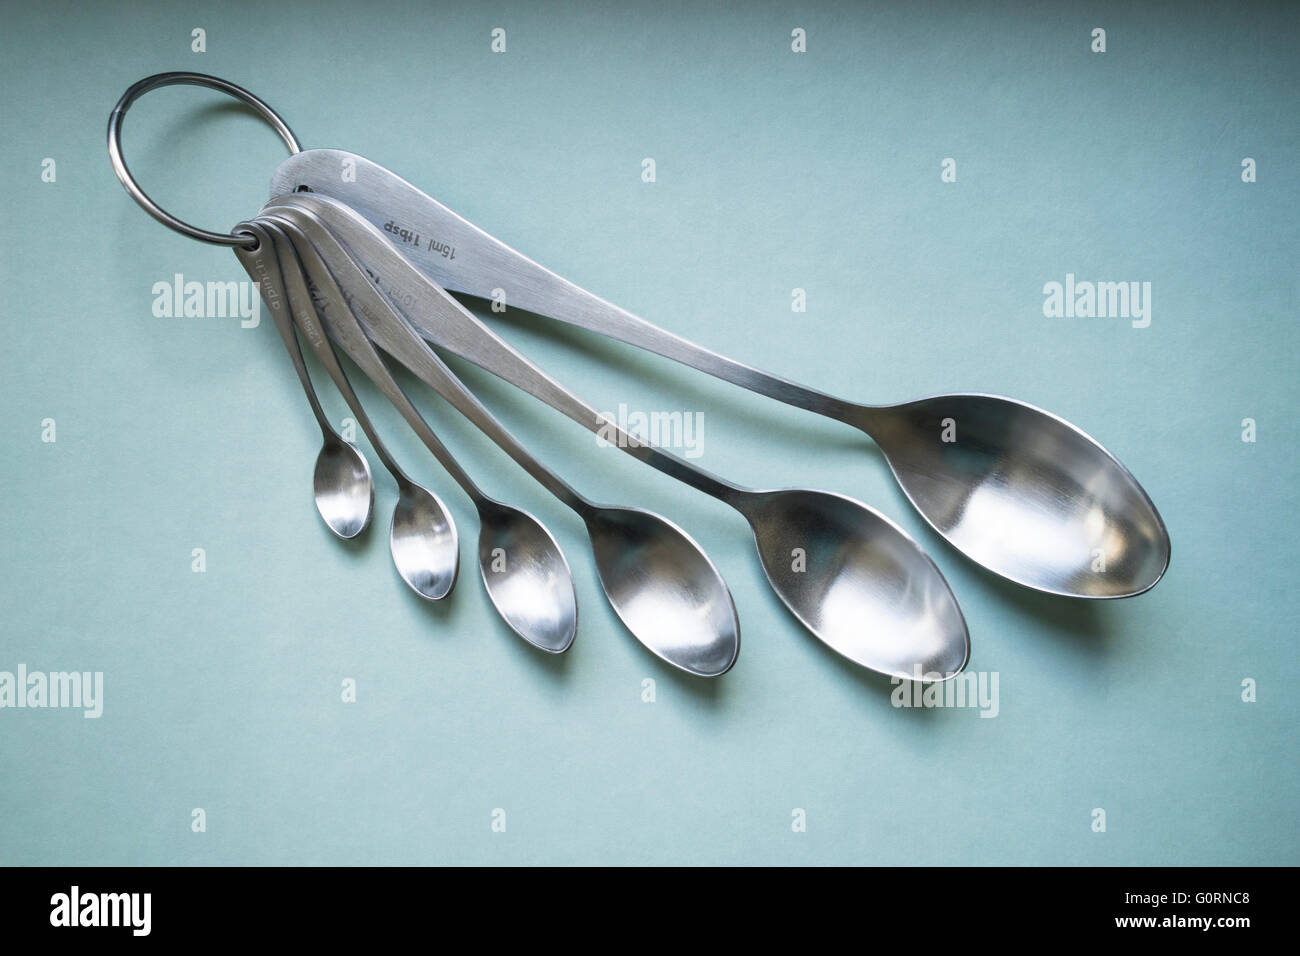 https://c8.alamy.com/comp/G0RNC8/a-set-of-brushed-stainless-steel-measuring-spoons-on-a-green-background-G0RNC8.jpg